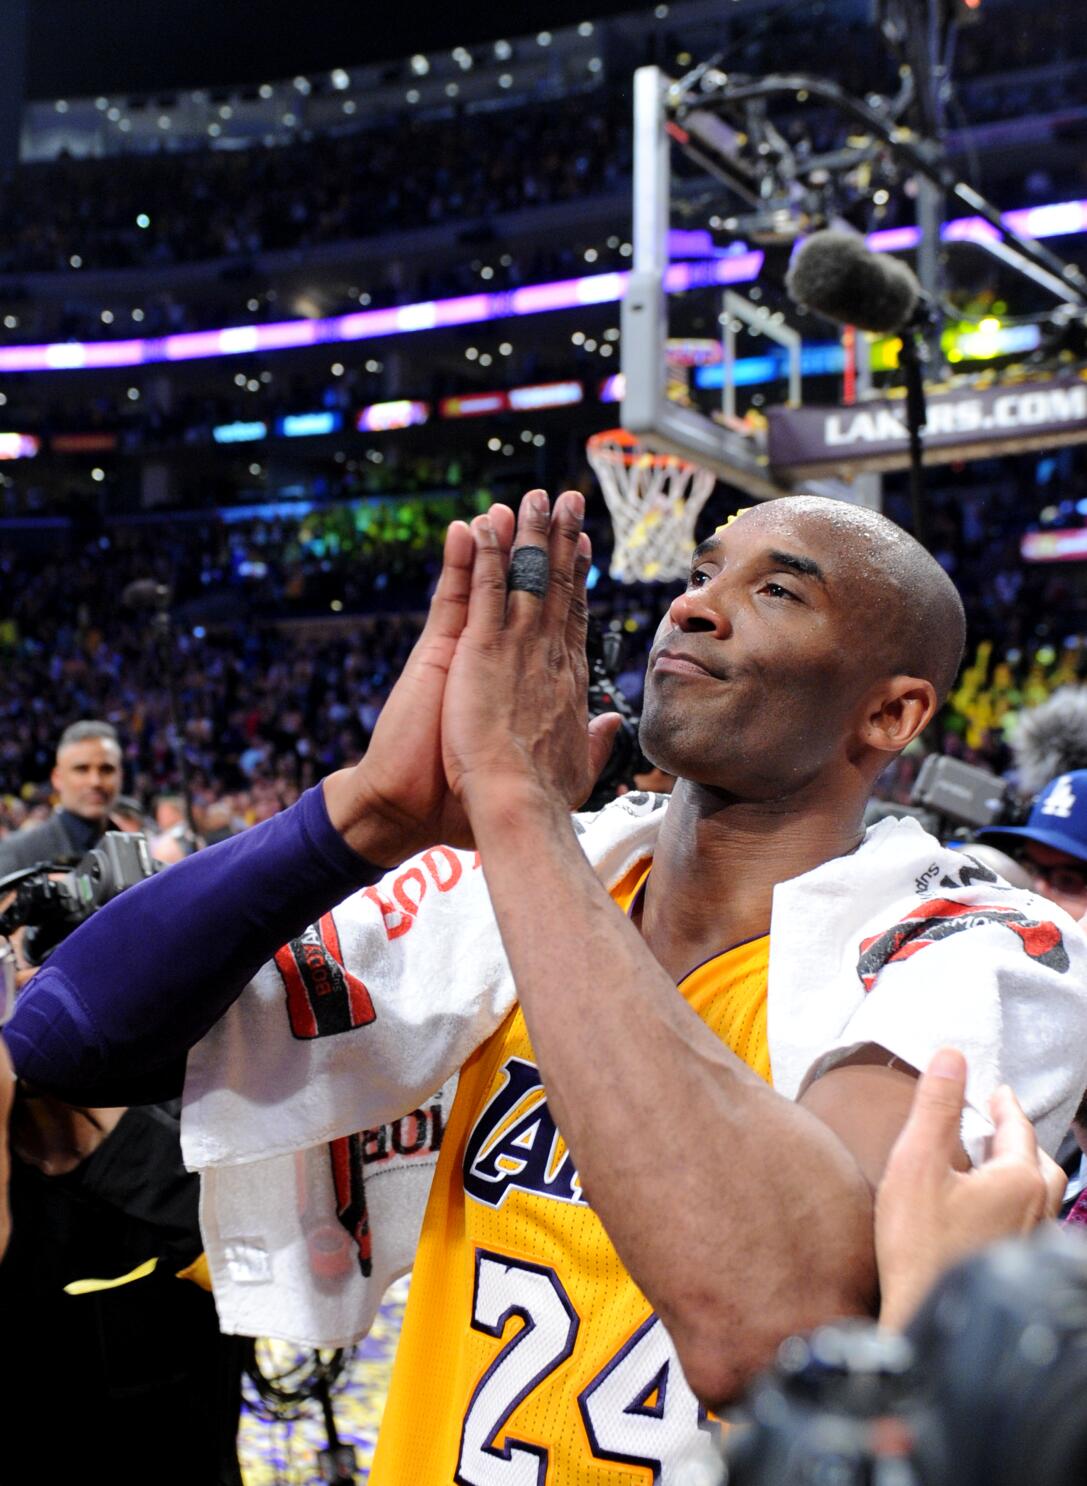 Remembering the night Kobe Bryant scored 81 points - Los Angeles Times